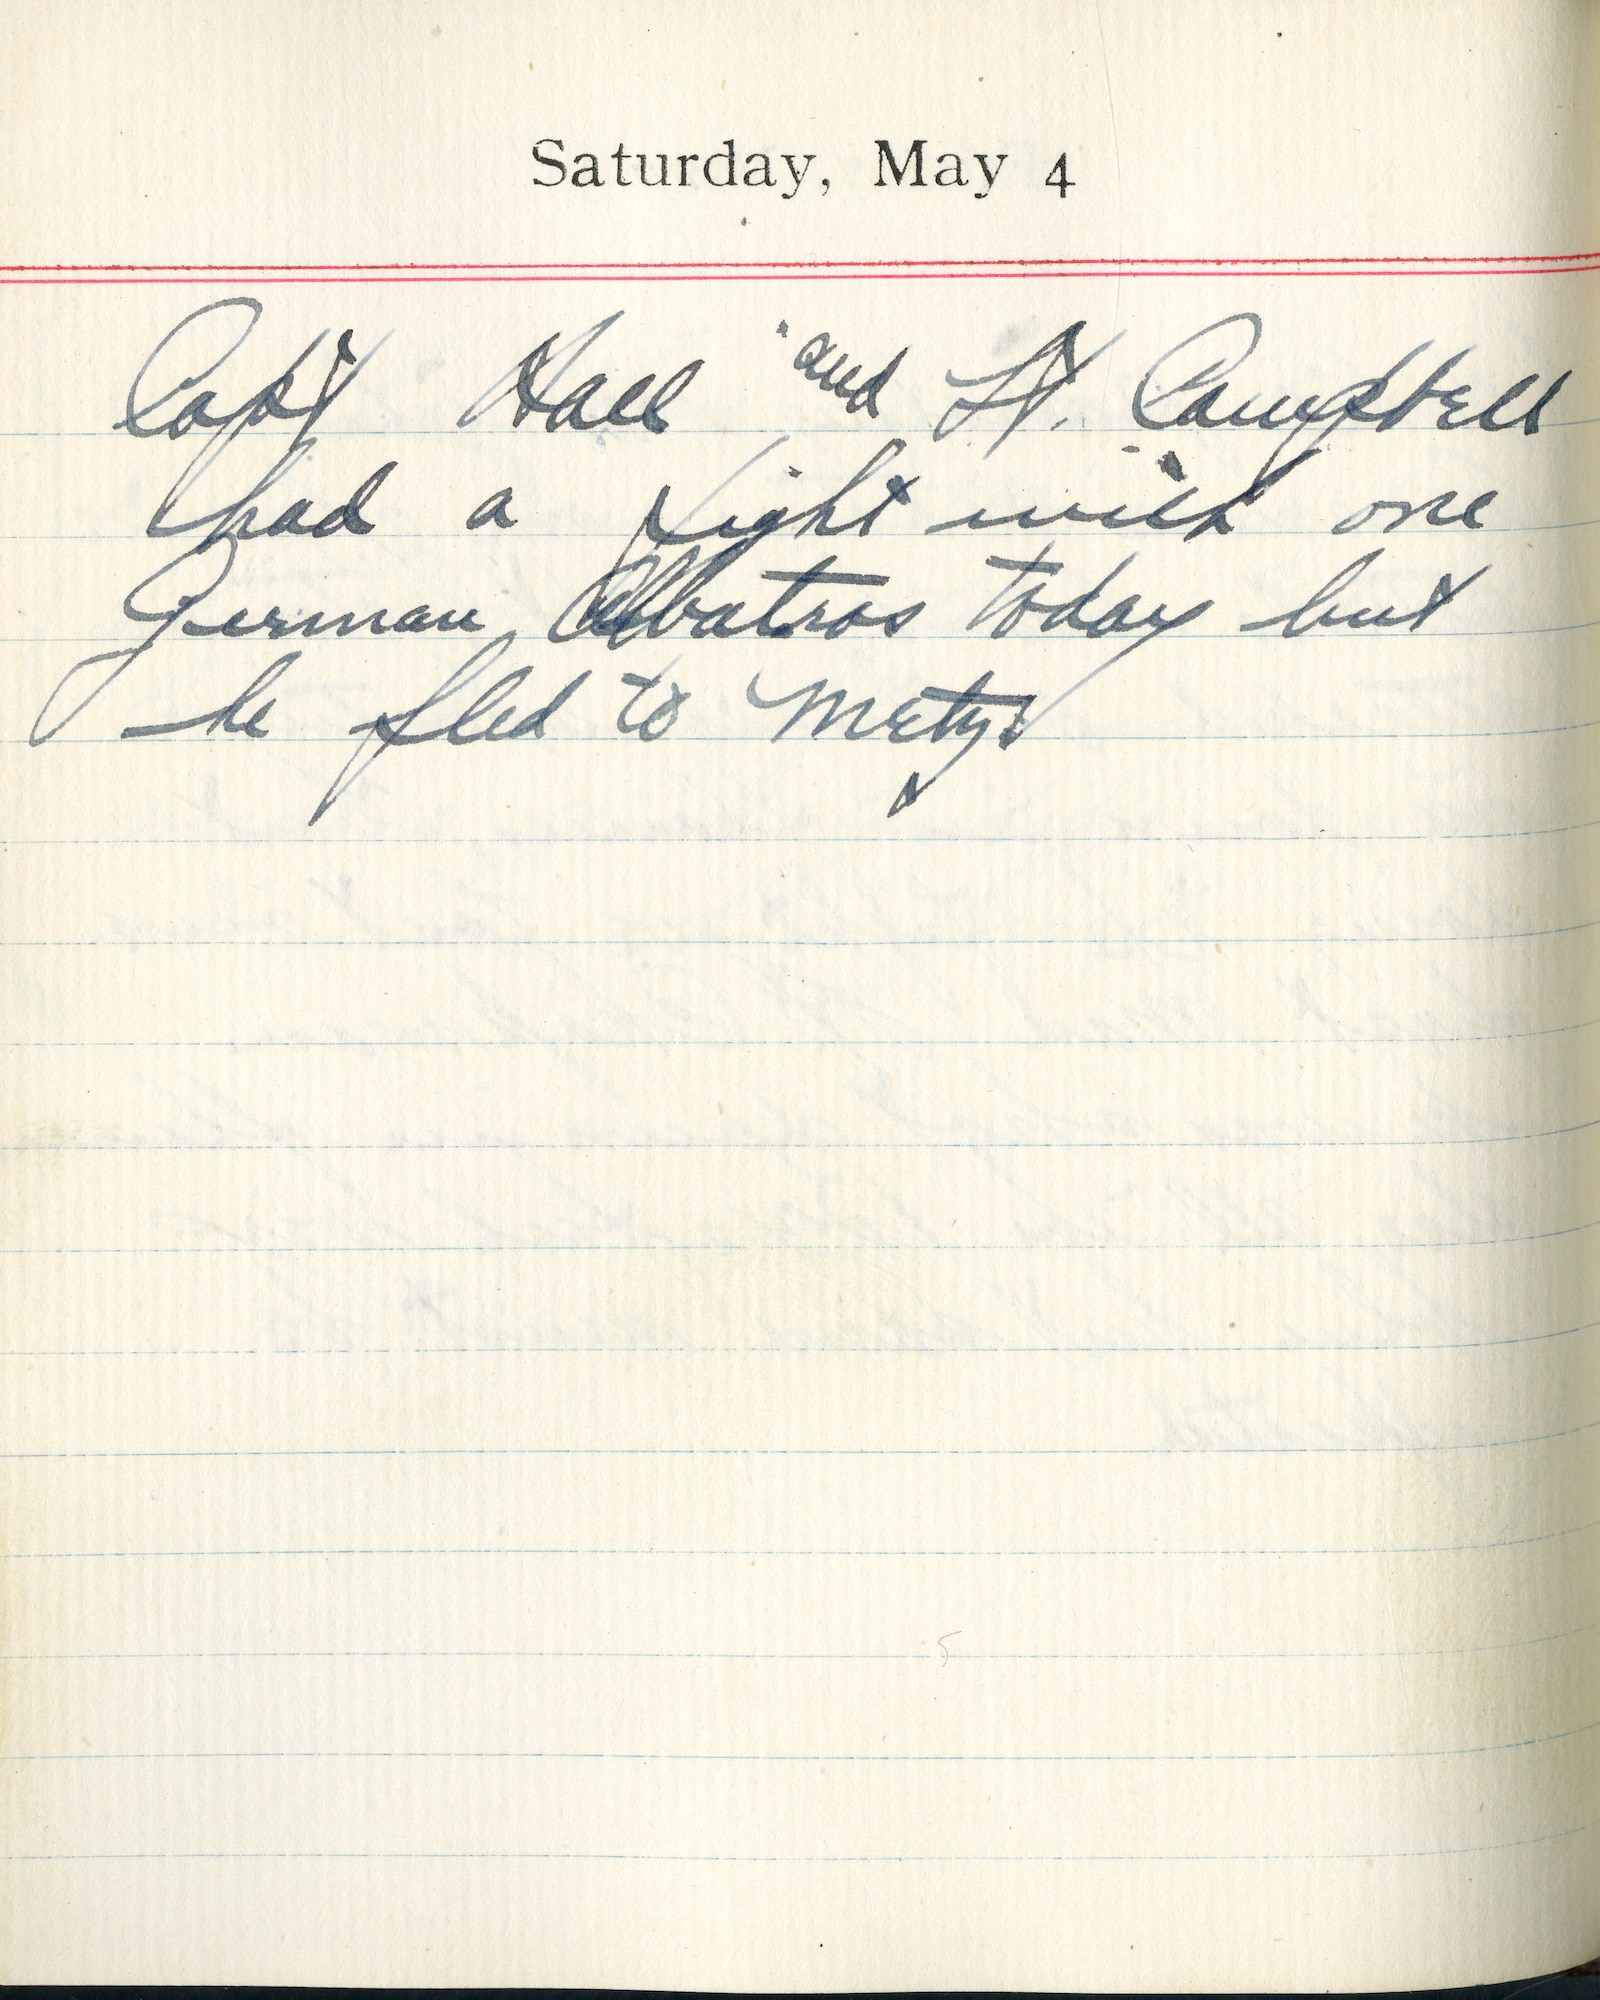 Capt. Edward V. Rickenbacker's 1918 wartime diary entry. (05/04/1918).

Capt. Hall and Lt. Campbell had a fight with one German Albatros today, but he fled to Metz.